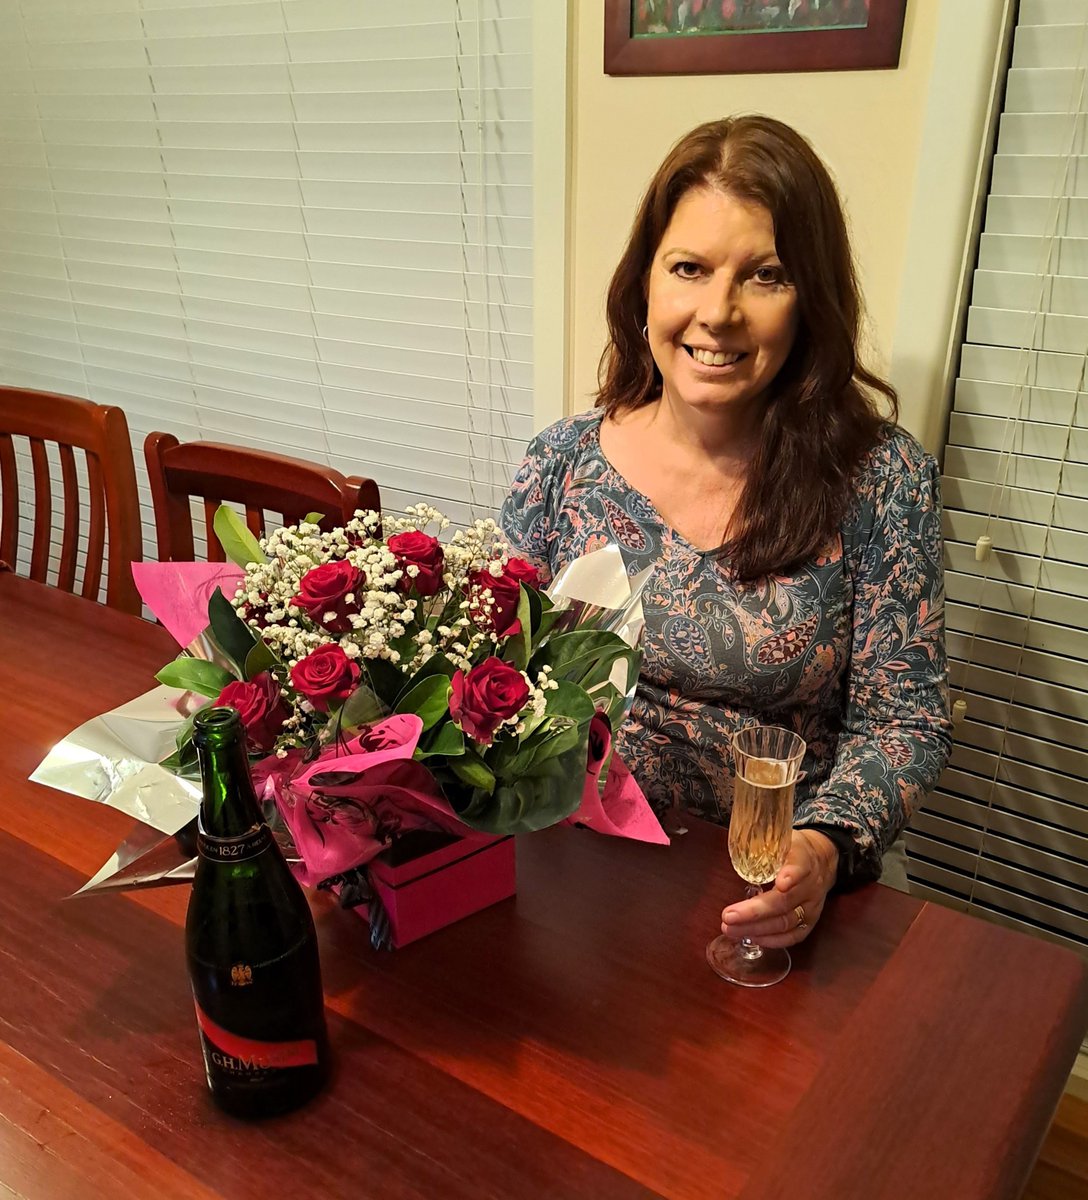 End-of-Book-Birthday tiredness. The flowers are from my husband, the champagne is from my son, the bags under my eyes are all mine.

Wow, what a day! Thank you for all the love for STU AND THE SKETCHY TIME STOPS. I am so grateful. 💜

#StuandtheSketchyTimeStops #TheSketcherSeries